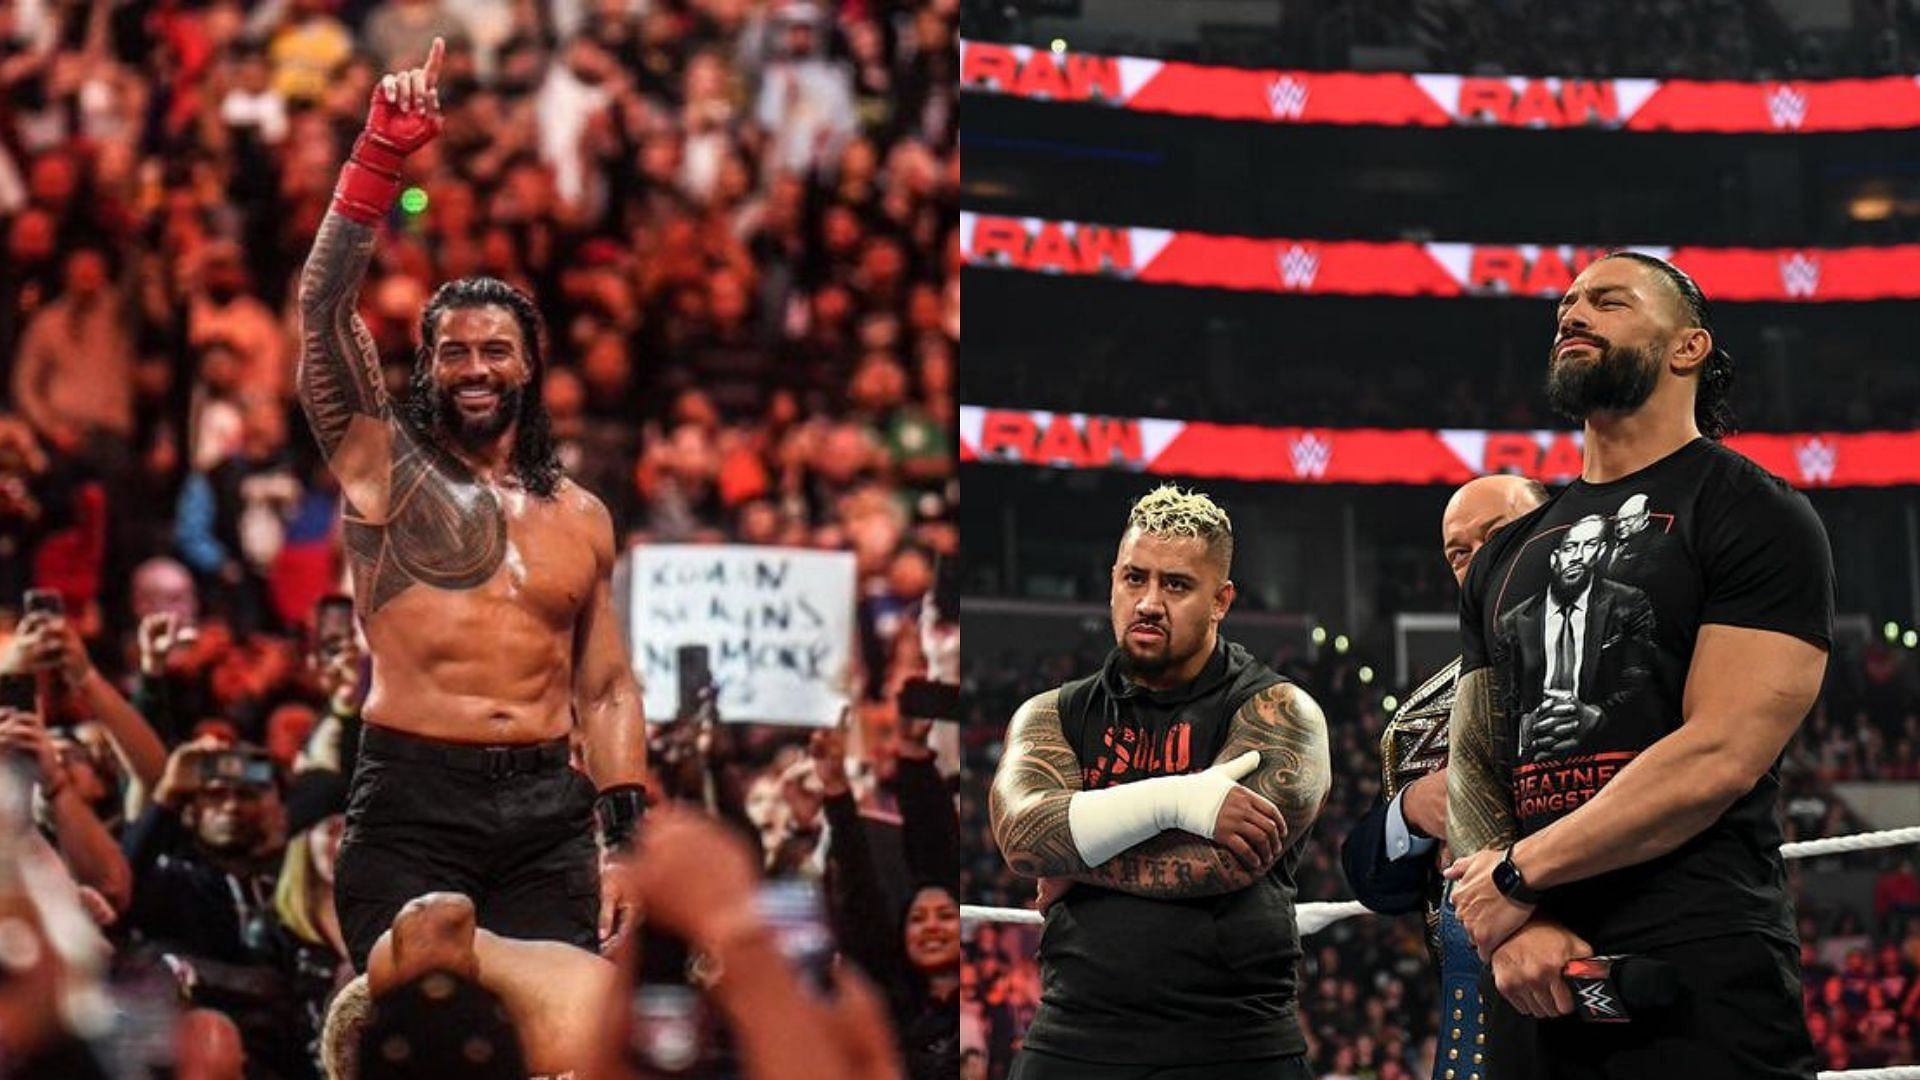 Could Roman Reigns add more members to The Bloodline?